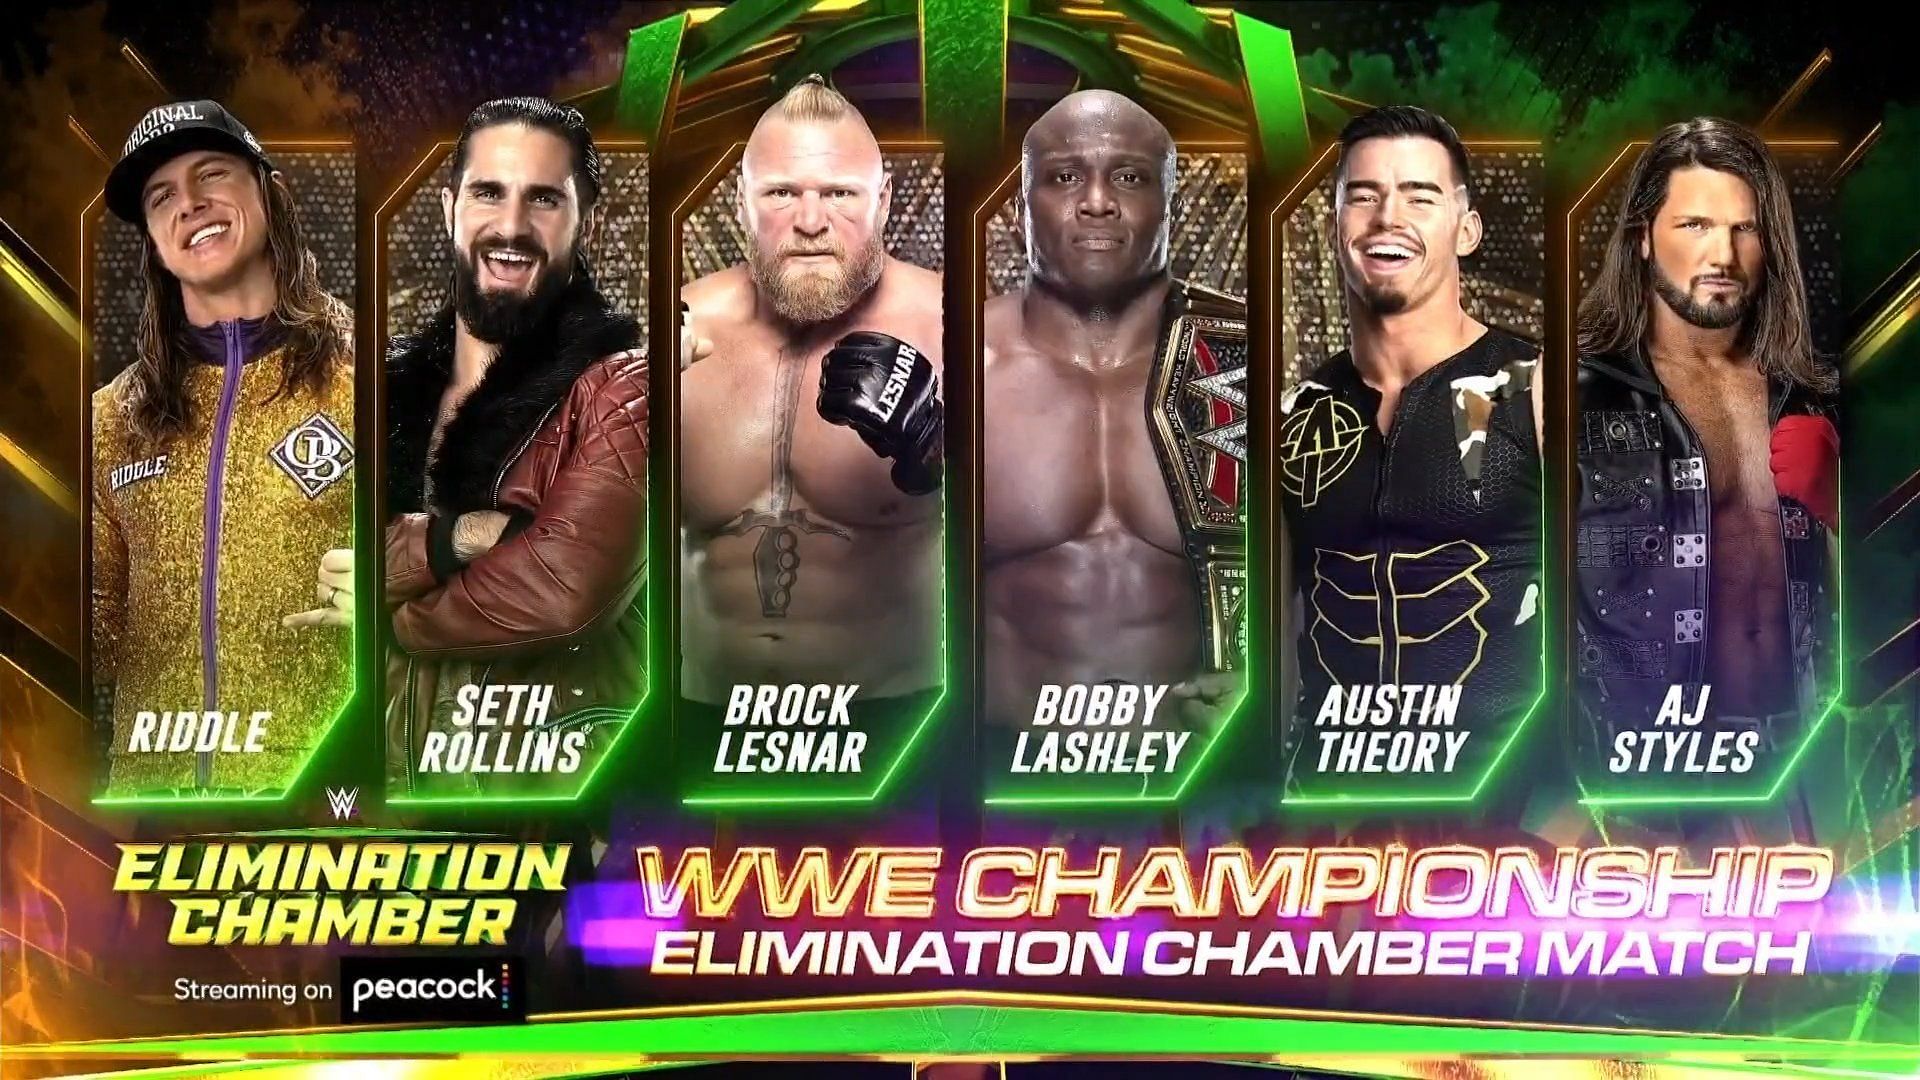 Plans changed for the Elimination Chamber Match (Image Credit- WWE Twitter)